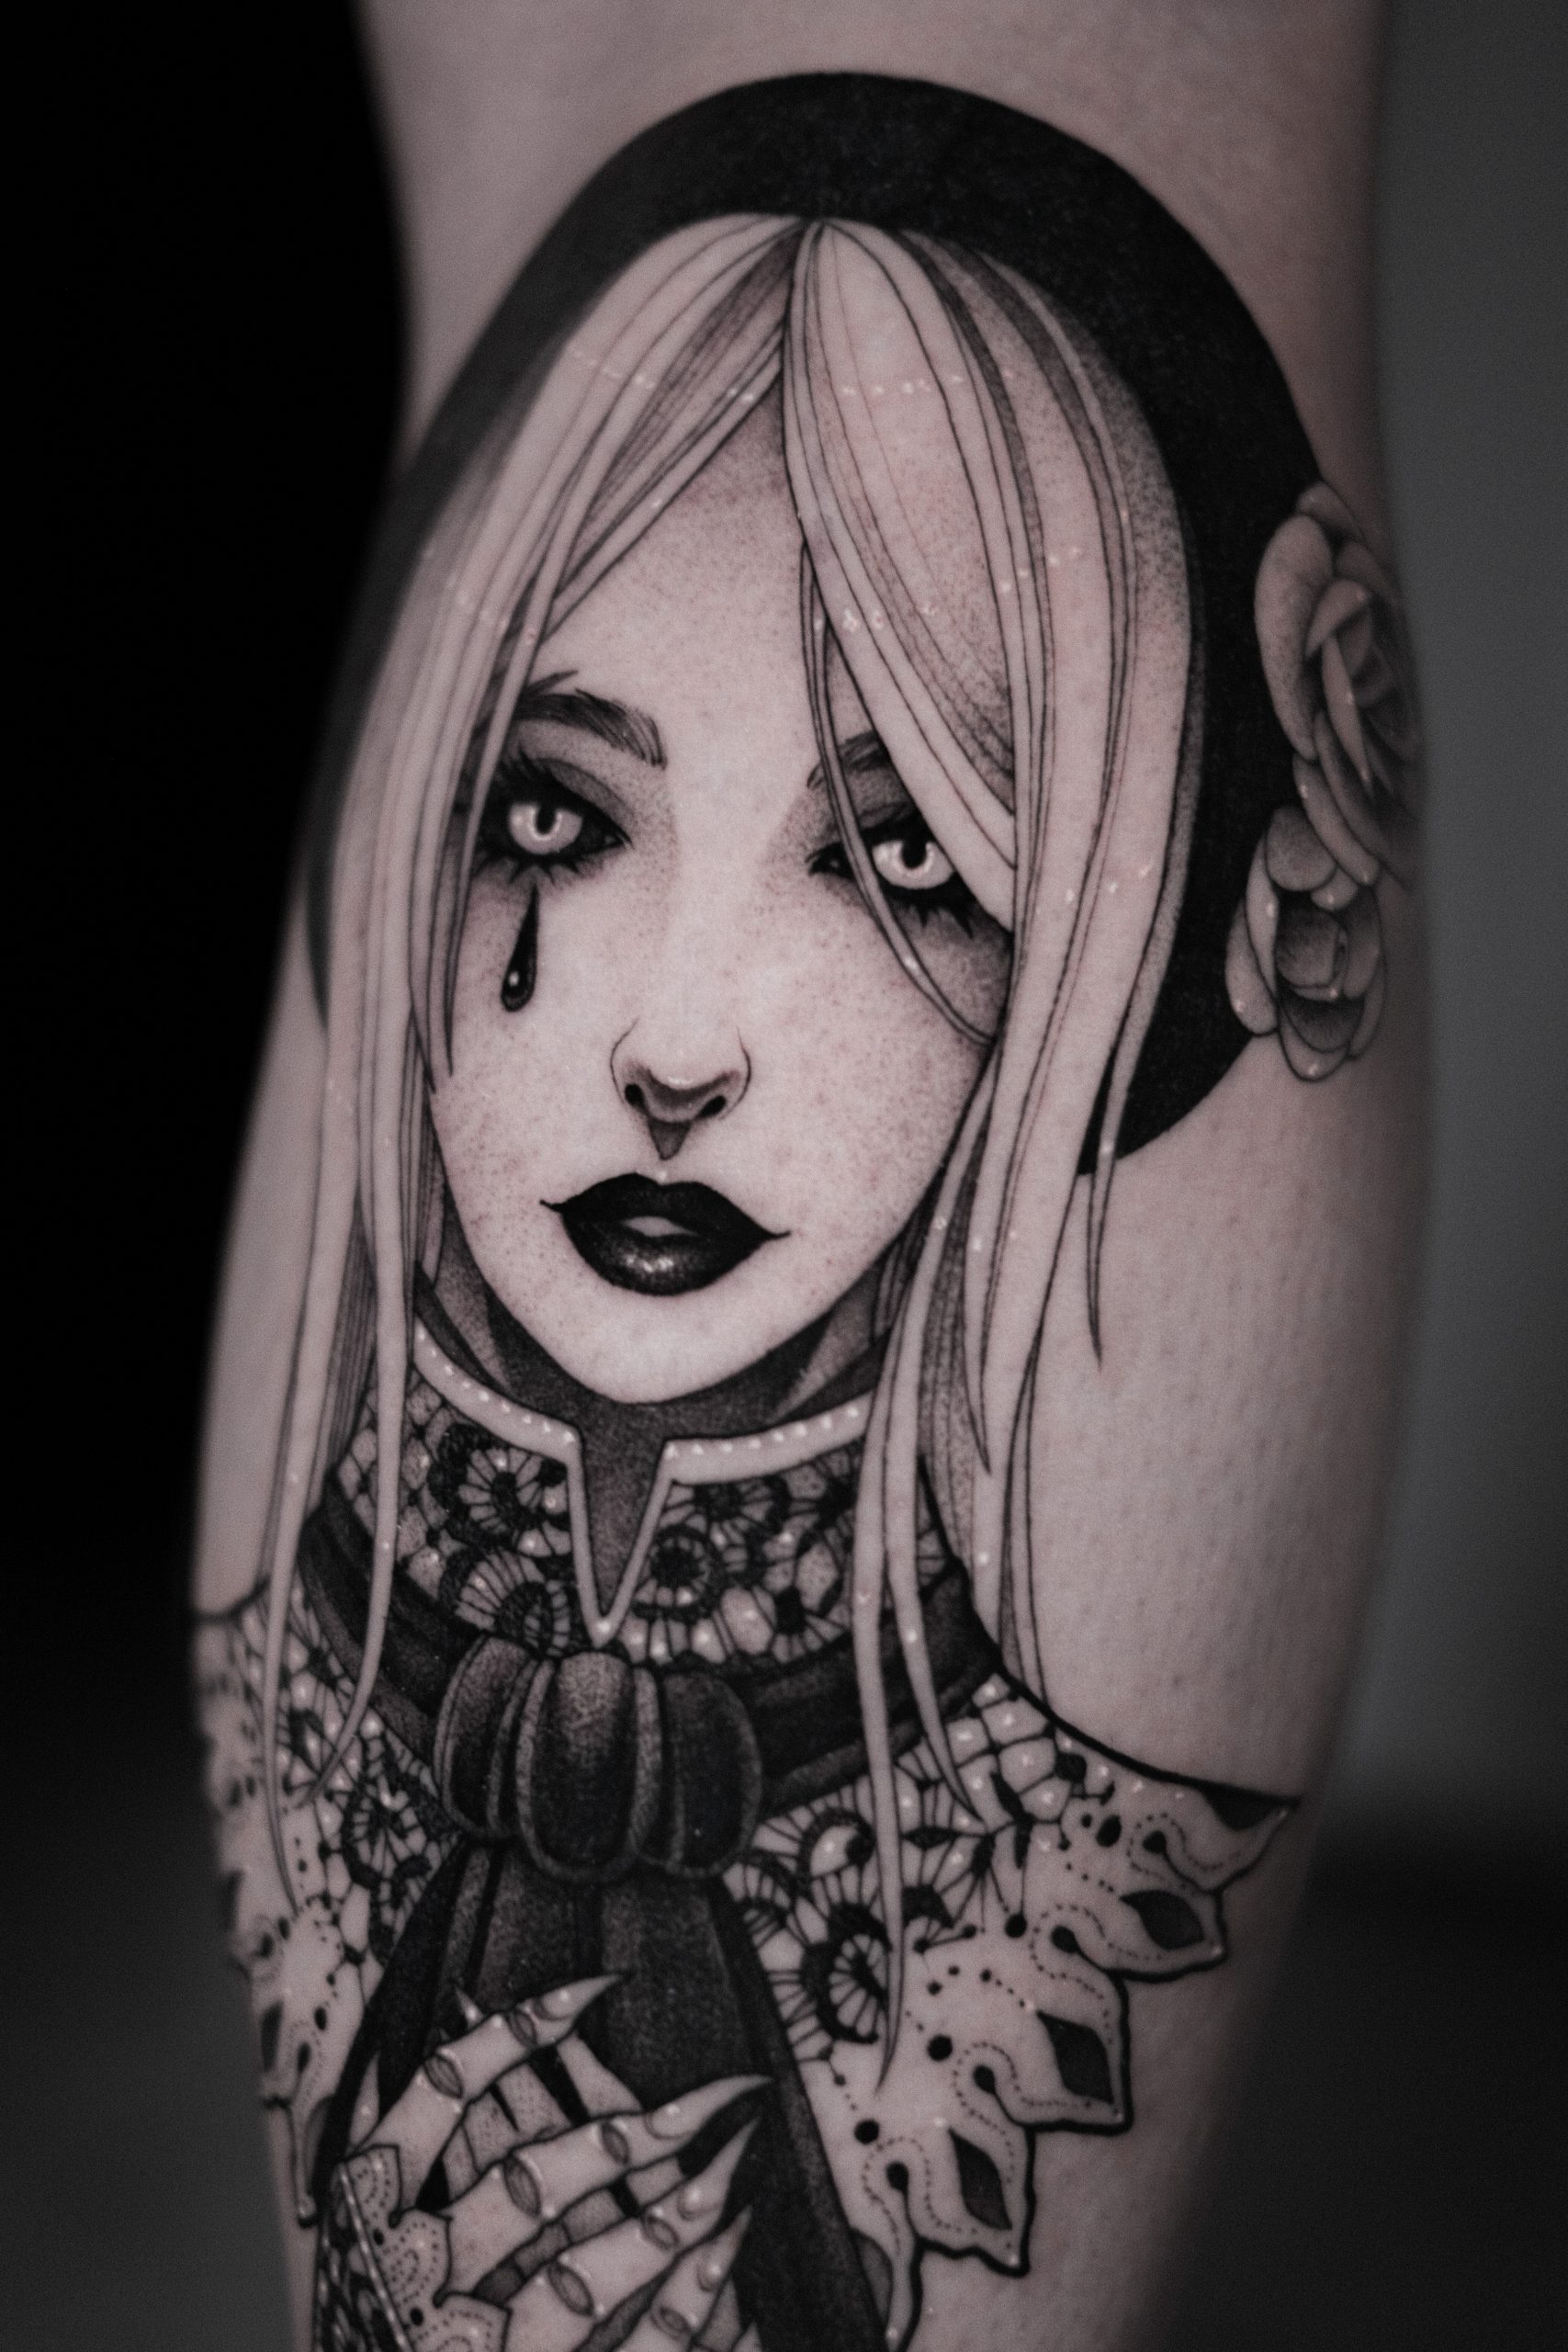 How will these dark horror style tattoos age Afraid they might fade badly   rTattooDesigns